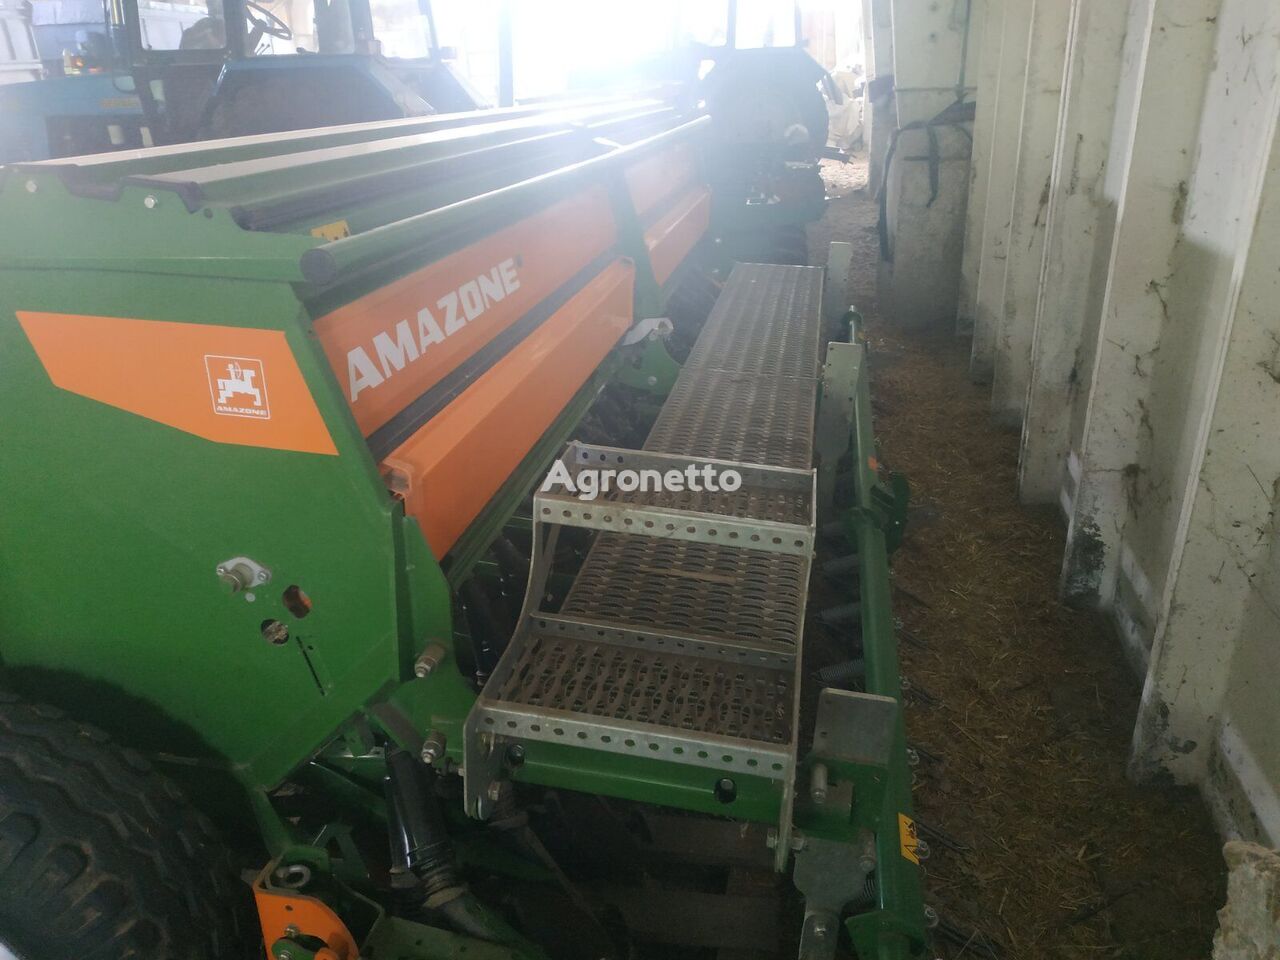 Amazone D9-4000 Super mechanical seed drill